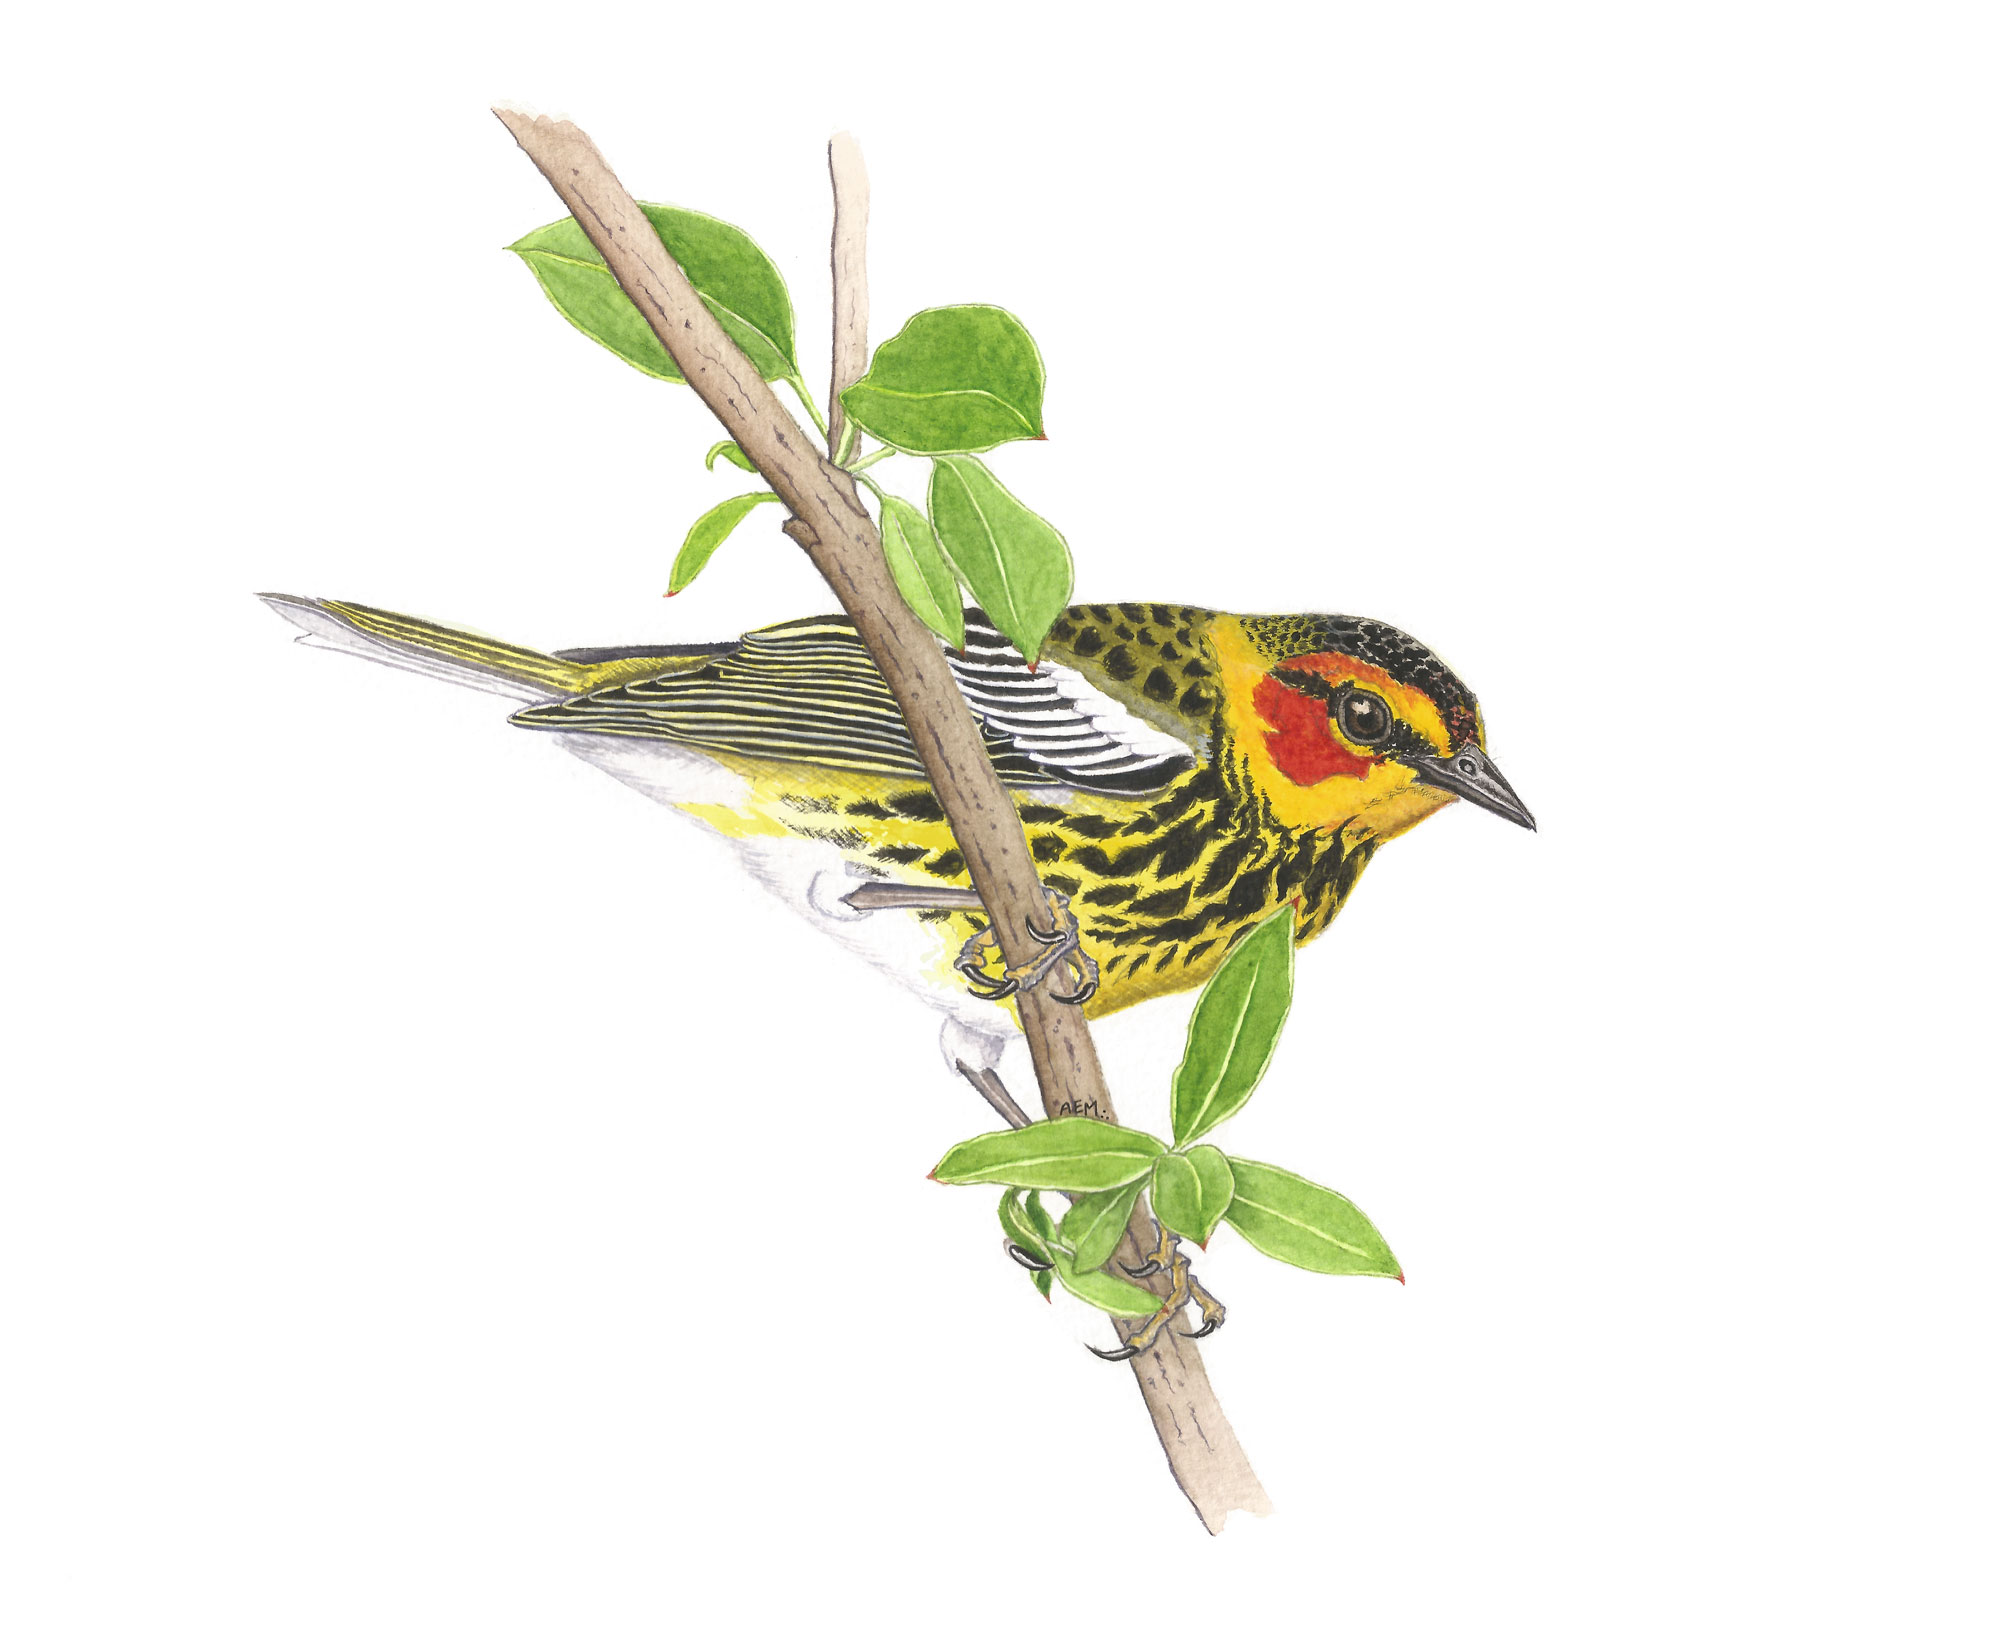 Cape May Warbler 